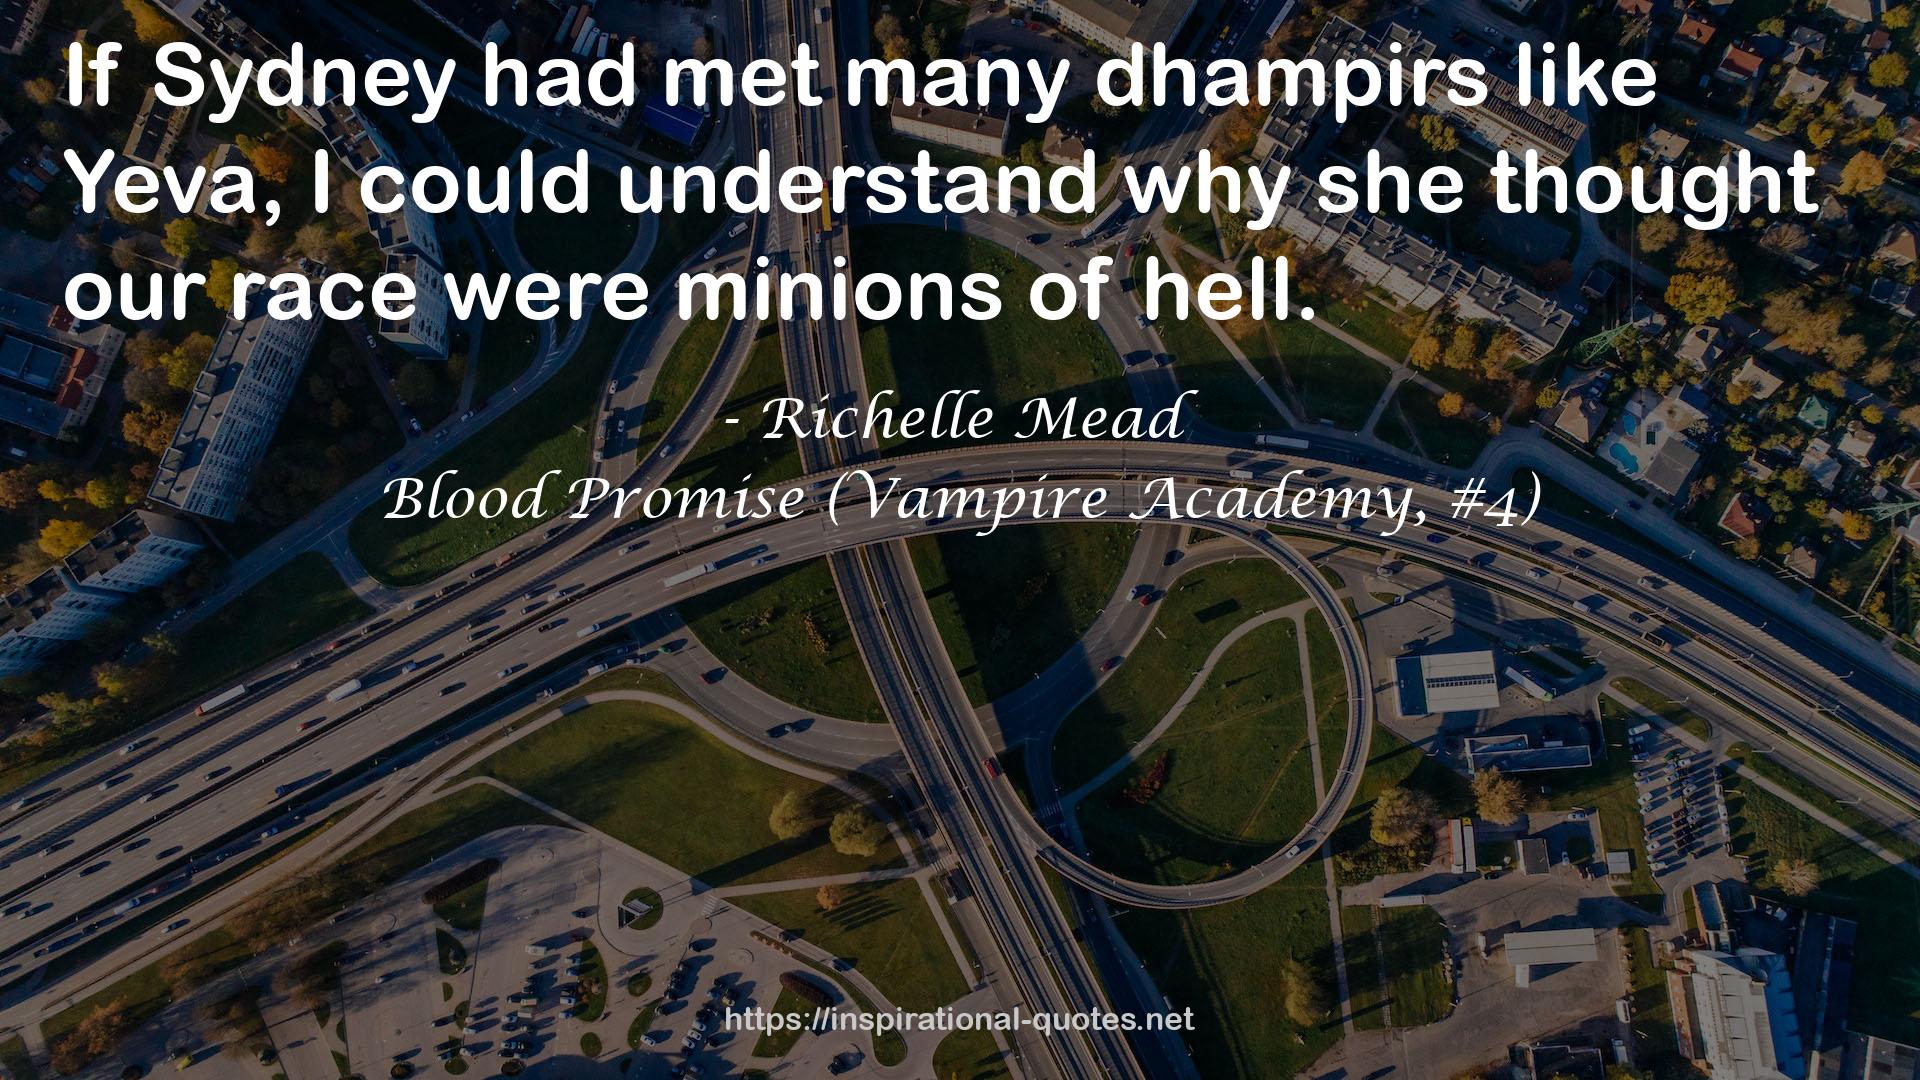 Blood Promise (Vampire Academy, #4) QUOTES